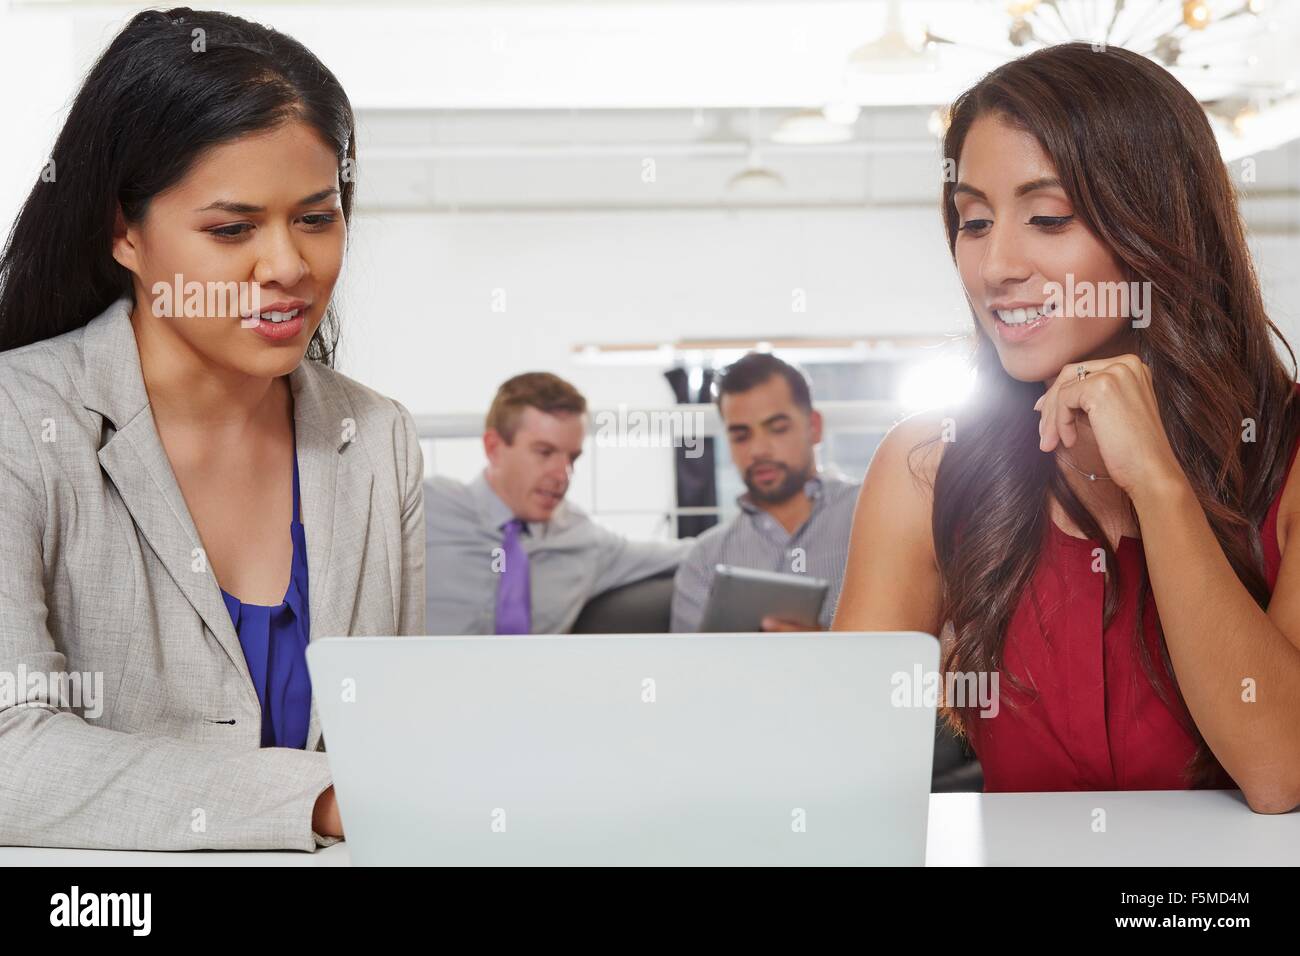 Two businesswomen sitting at desk, looking at laptop Stock Photo